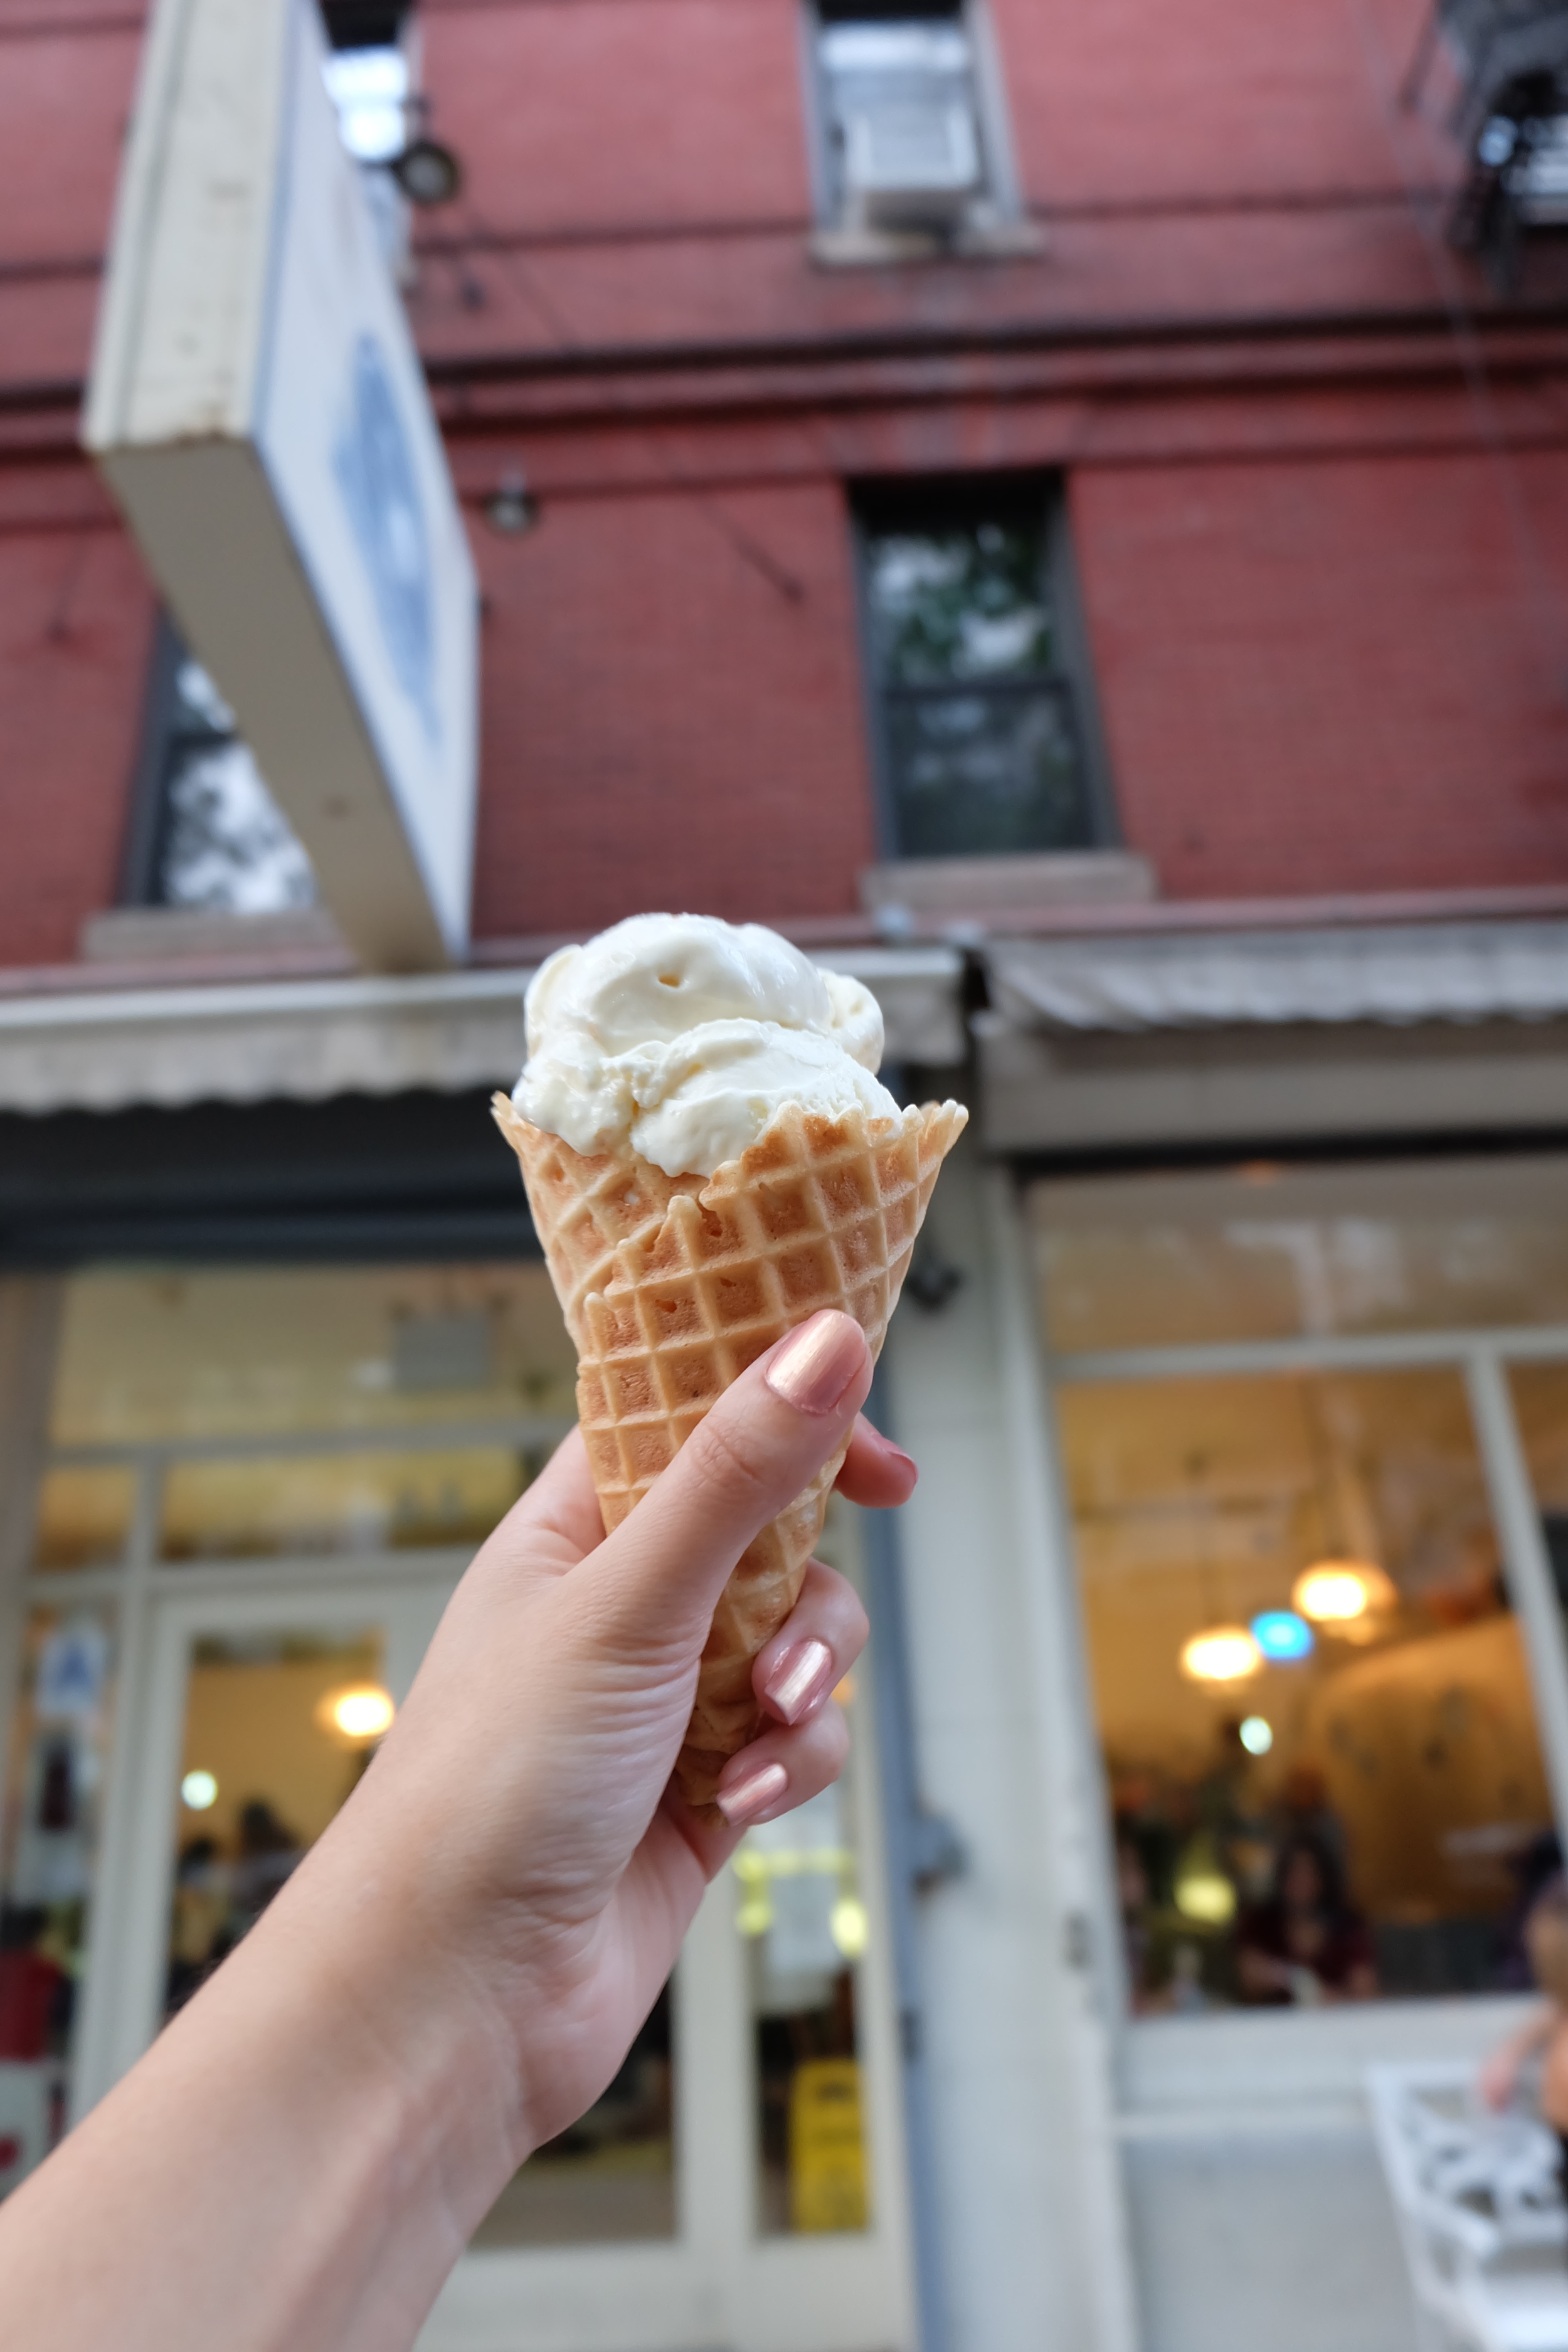 14. Sundaes and Cones: After a 15 year lease in Brooklyn this shop picked up and moved to the East Village serving fun flavors including Asian-inspired ginger, lychee, mango, wasabi and black sesame.